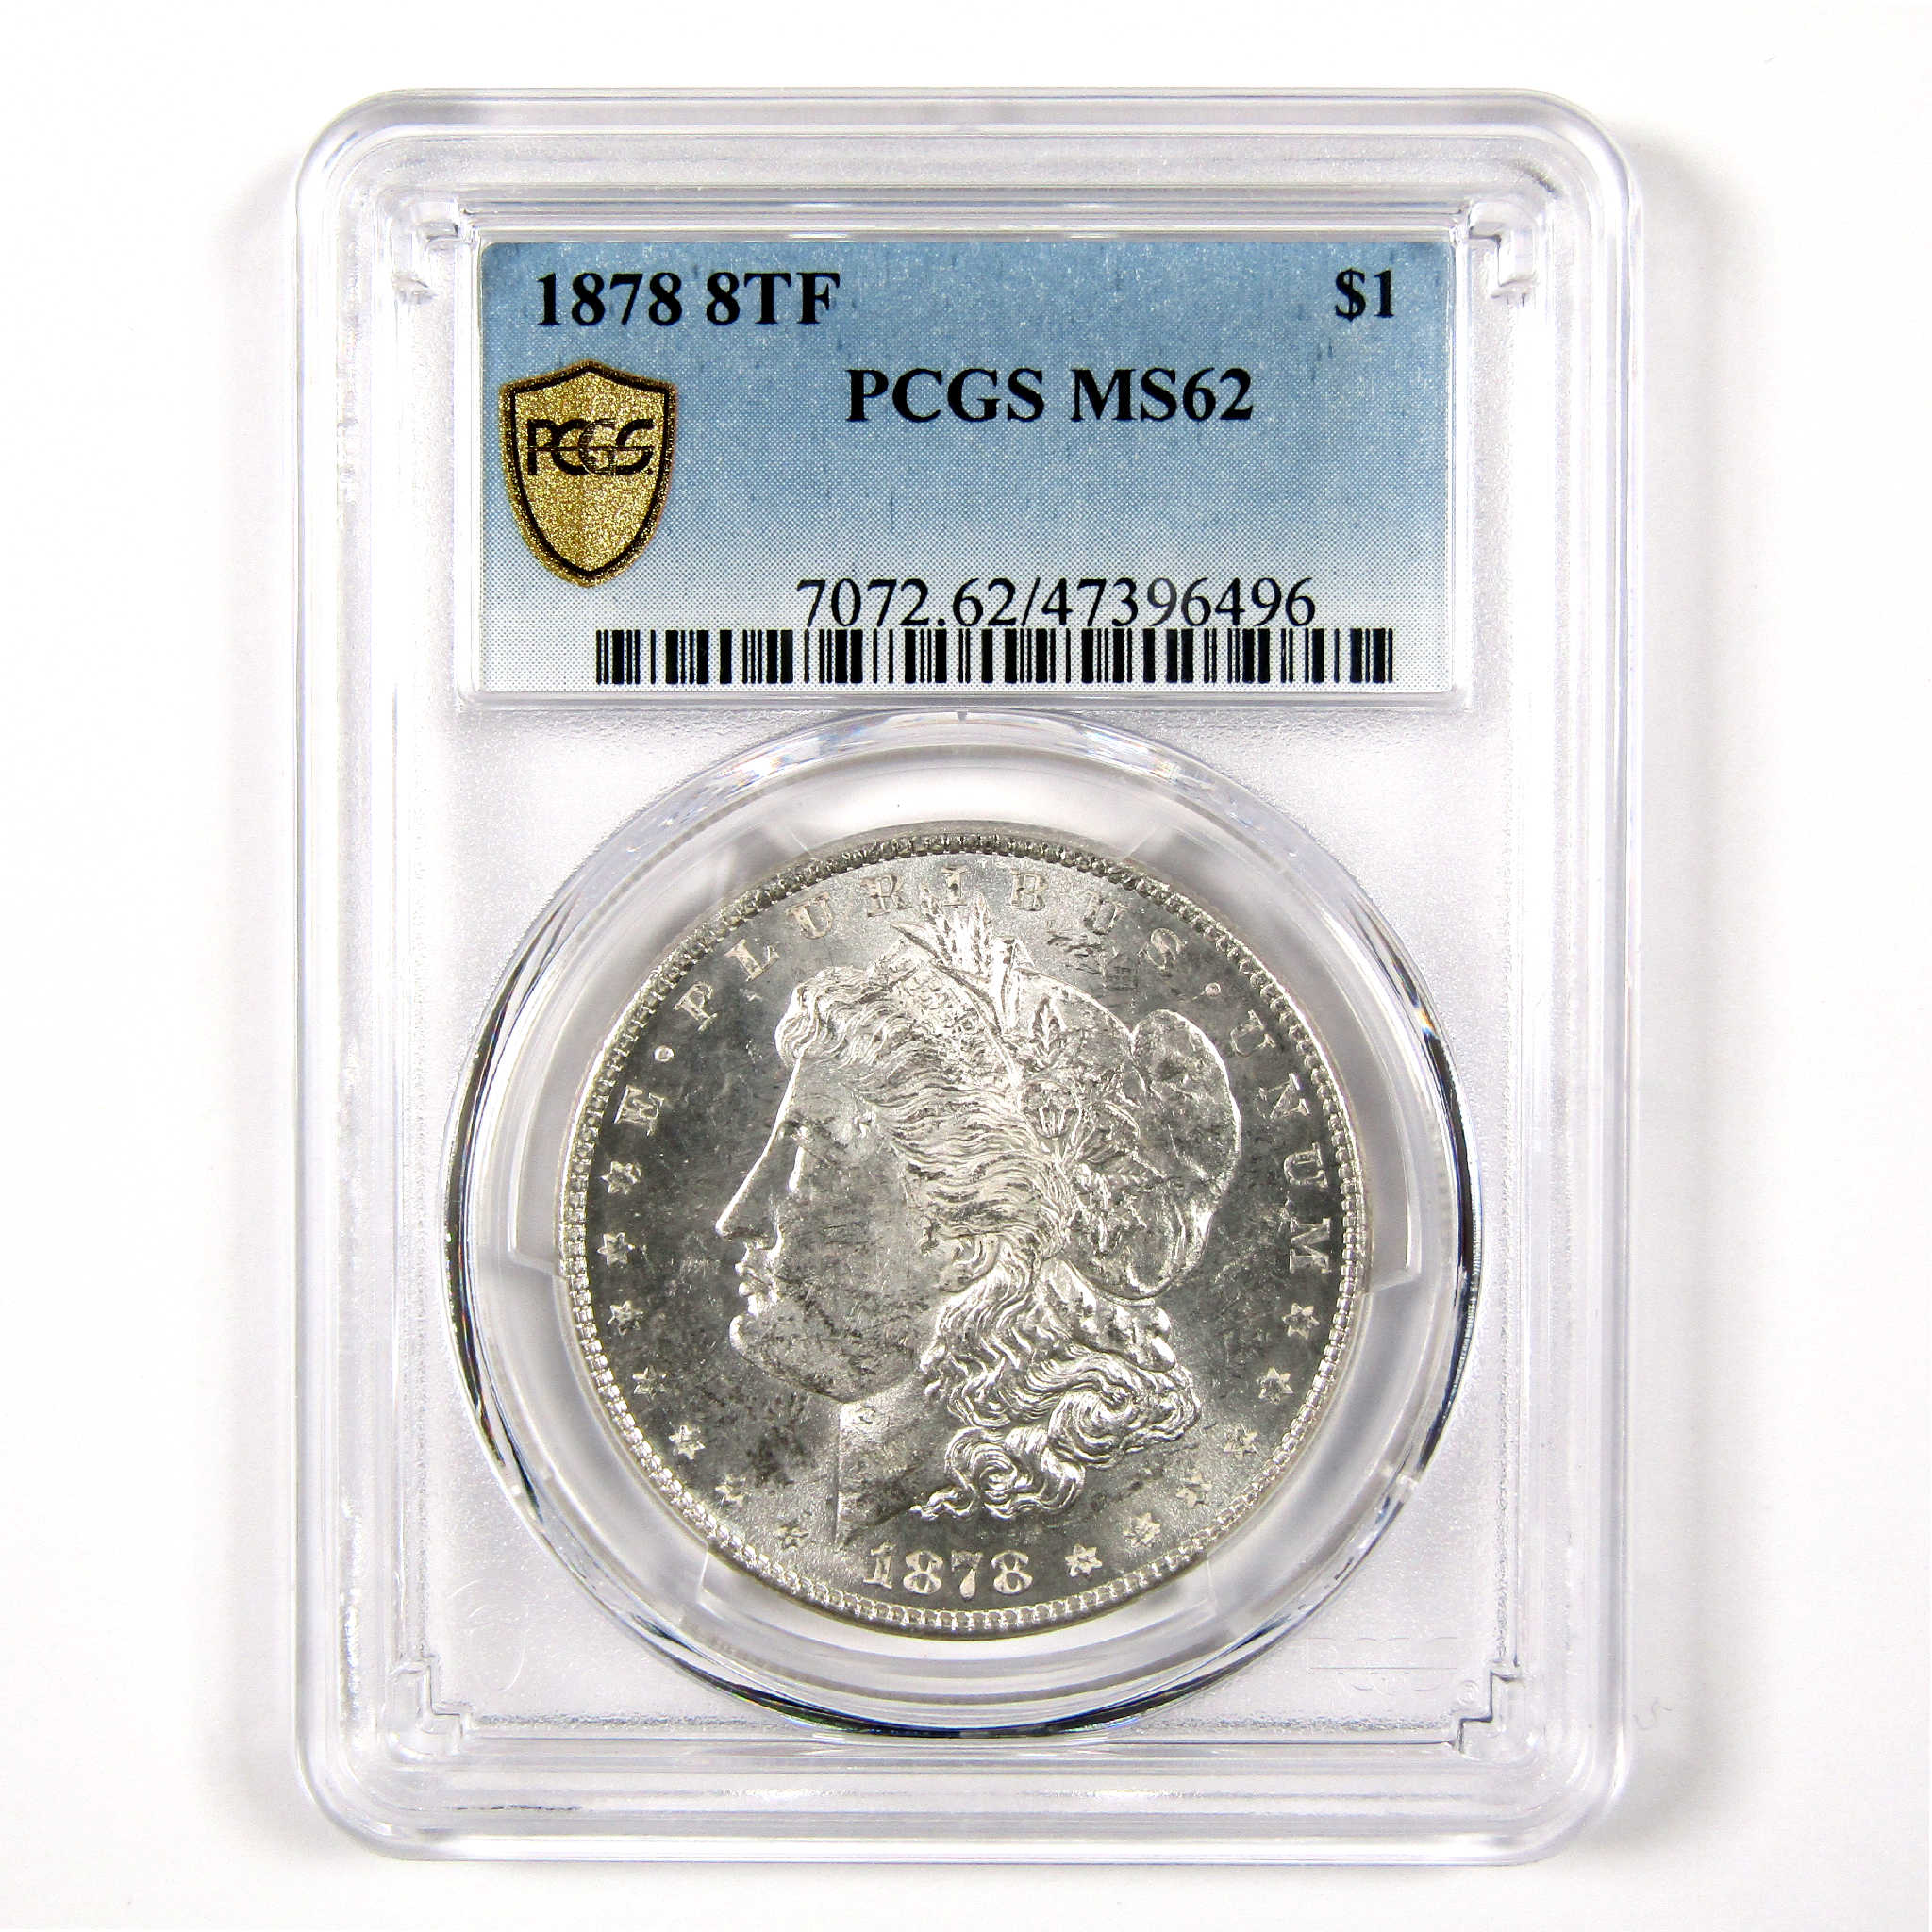 1878 8TF Morgan Dollar MS 62 PCGS Silver $1 Uncirculated SKU:I11337 - Morgan coin - Morgan silver dollar - Morgan silver dollar for sale - Profile Coins &amp; Collectibles